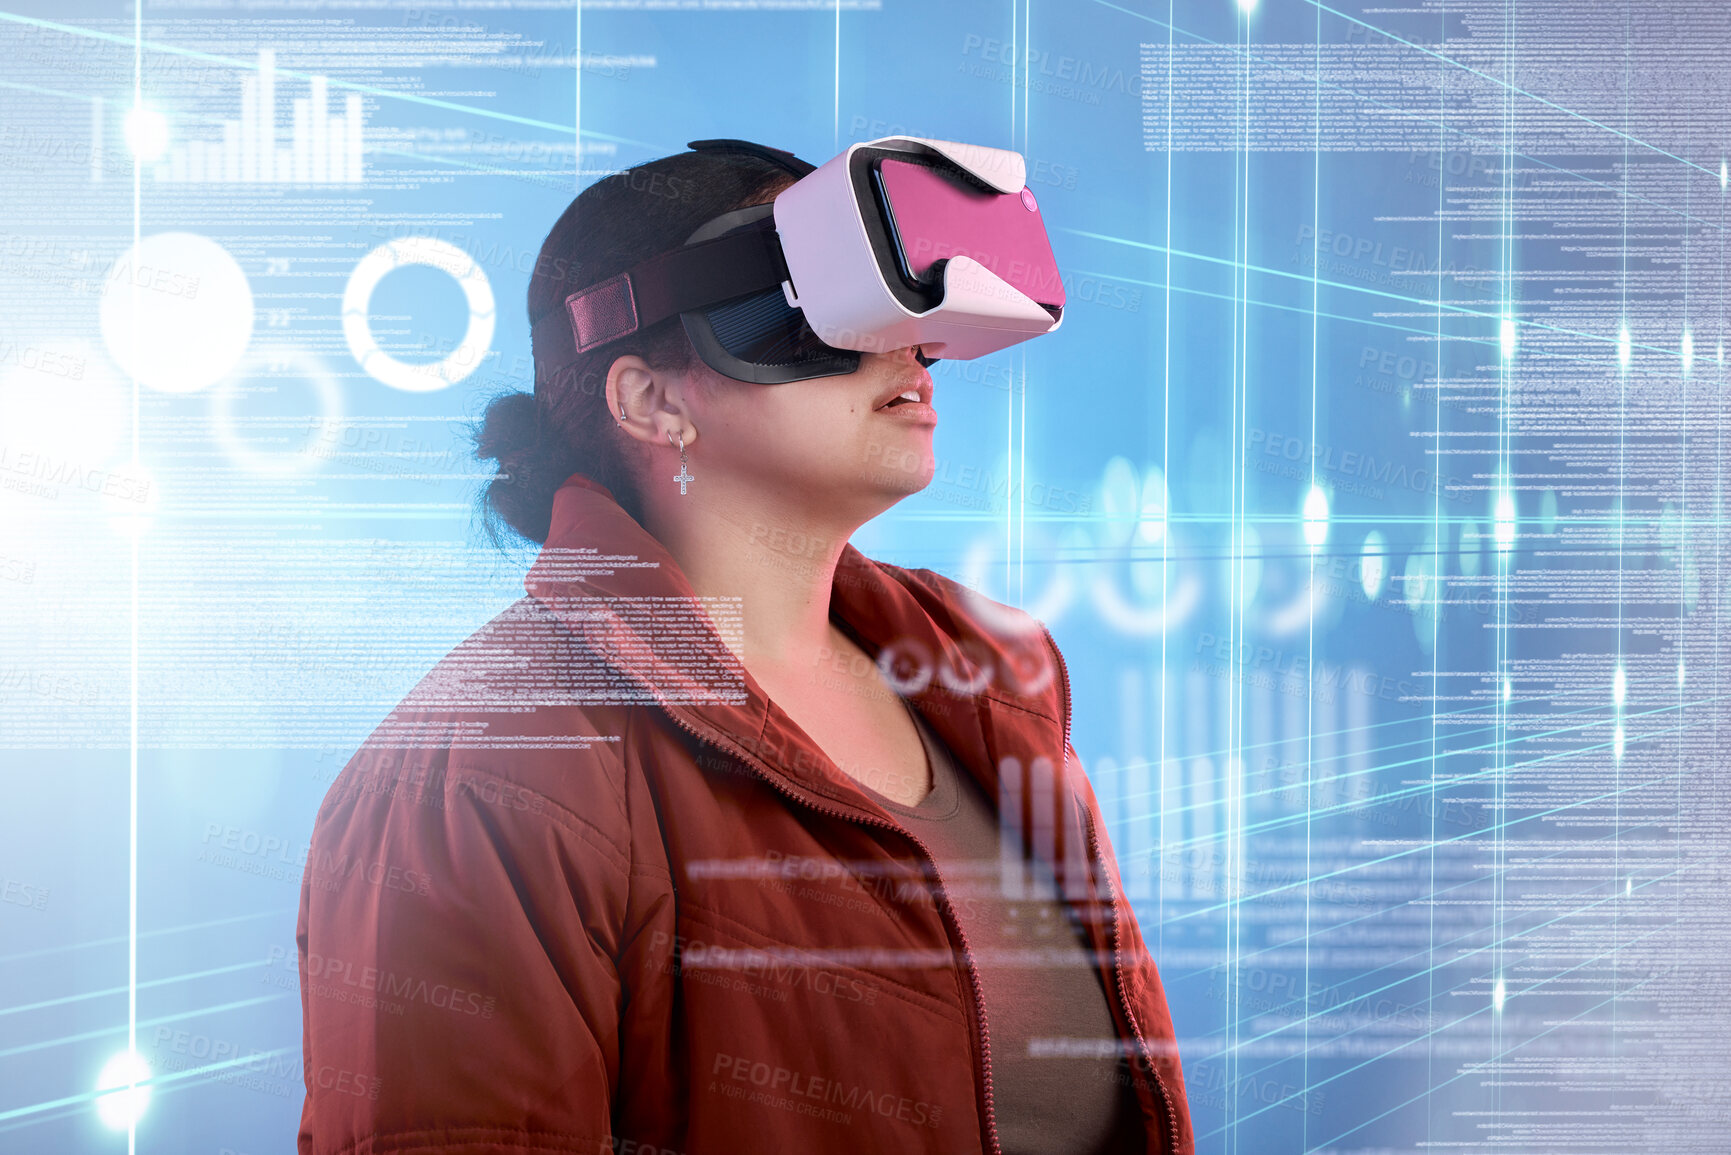 Buy stock photo Metaverse, girl or virtual reality glasses with overlay for digital transformation, charts or graphs online. Woman with cool vr headset in holographic cyber 3d technology for big data or future news